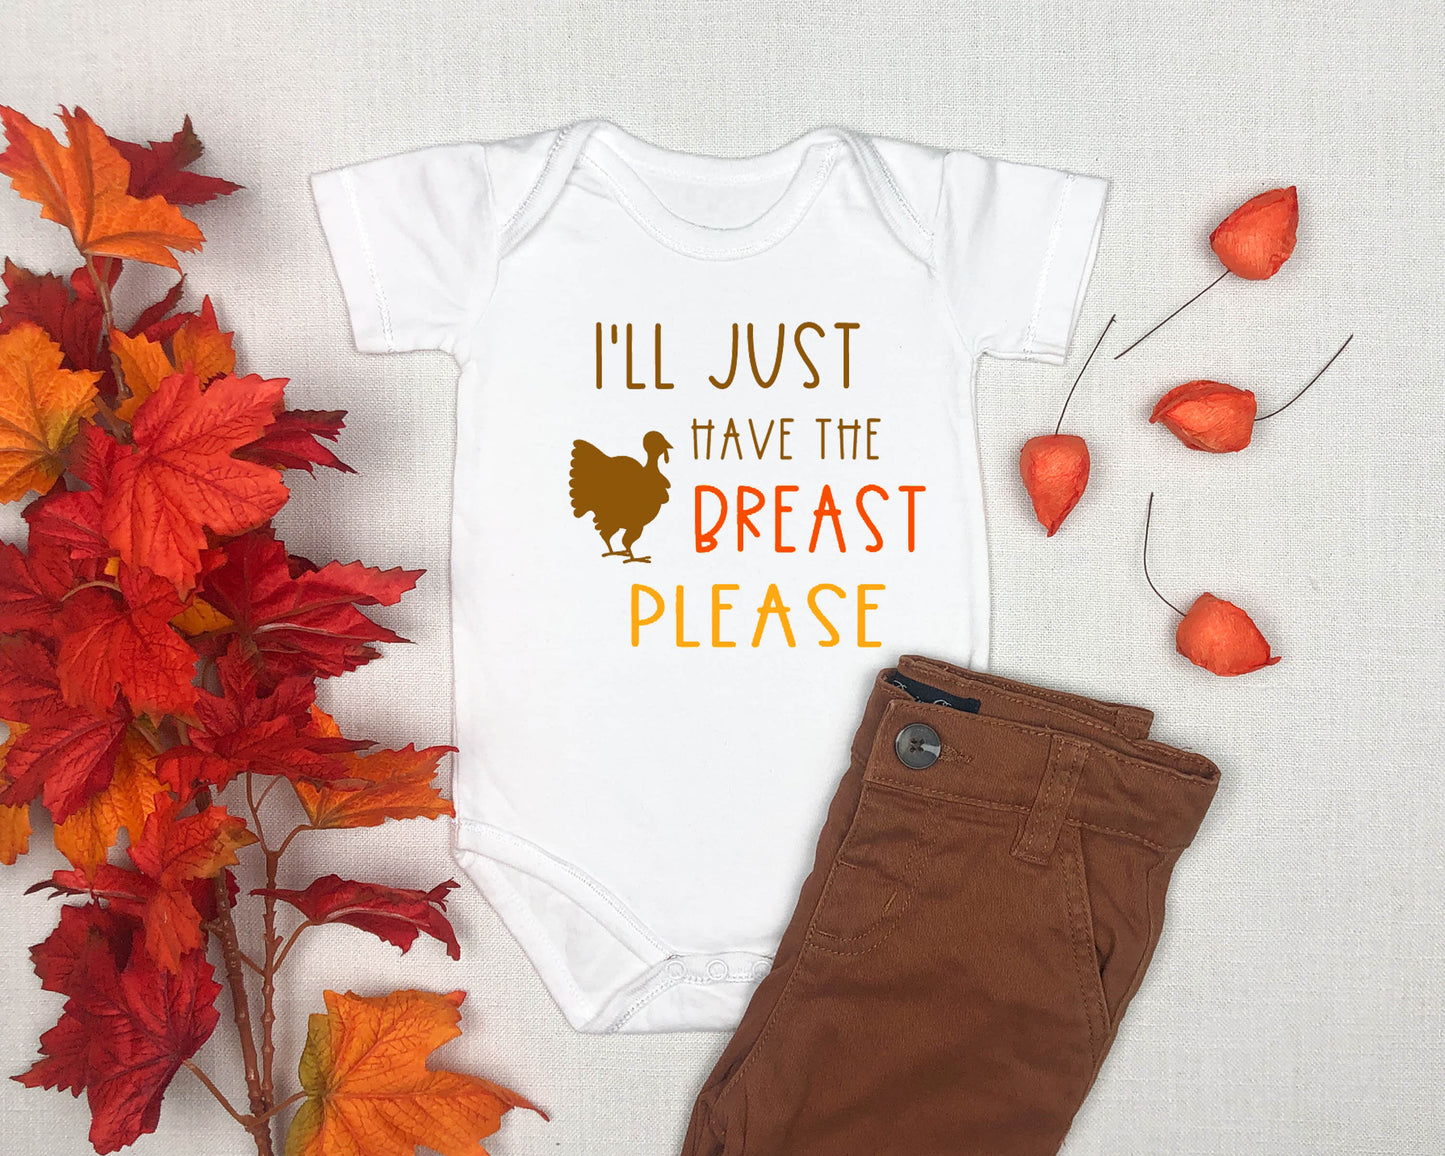 I'll Just Have The Breast Please, Thanksgiving Bodysuit, Breastfeeding Bodysuit, Turkey, Funny Baby Outfit, Fall Bodysuit, Unisex Outfit